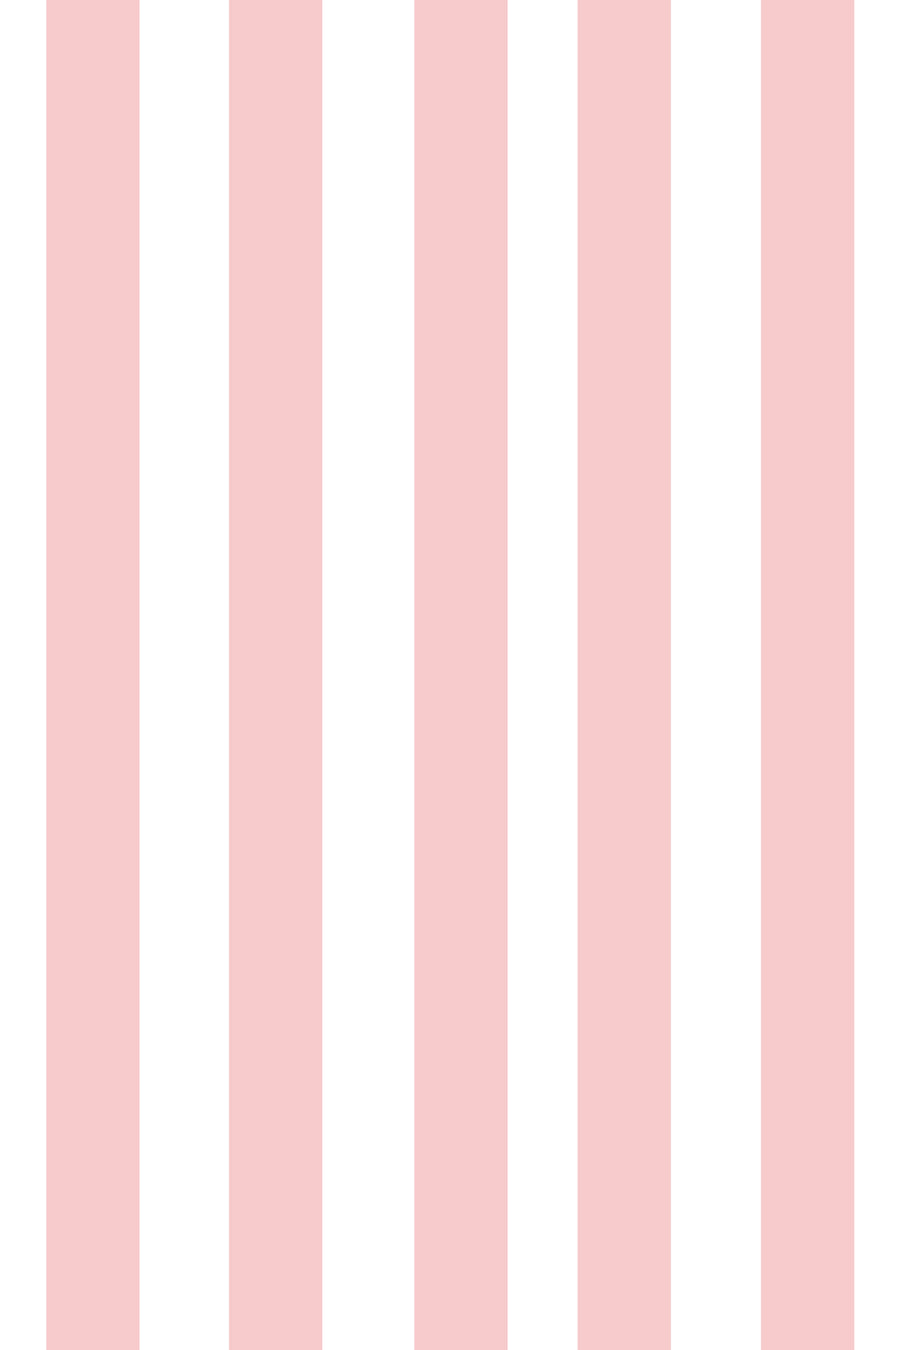 Woolf With Me Fitted Crib Sheet Stripes color_rose-quartz